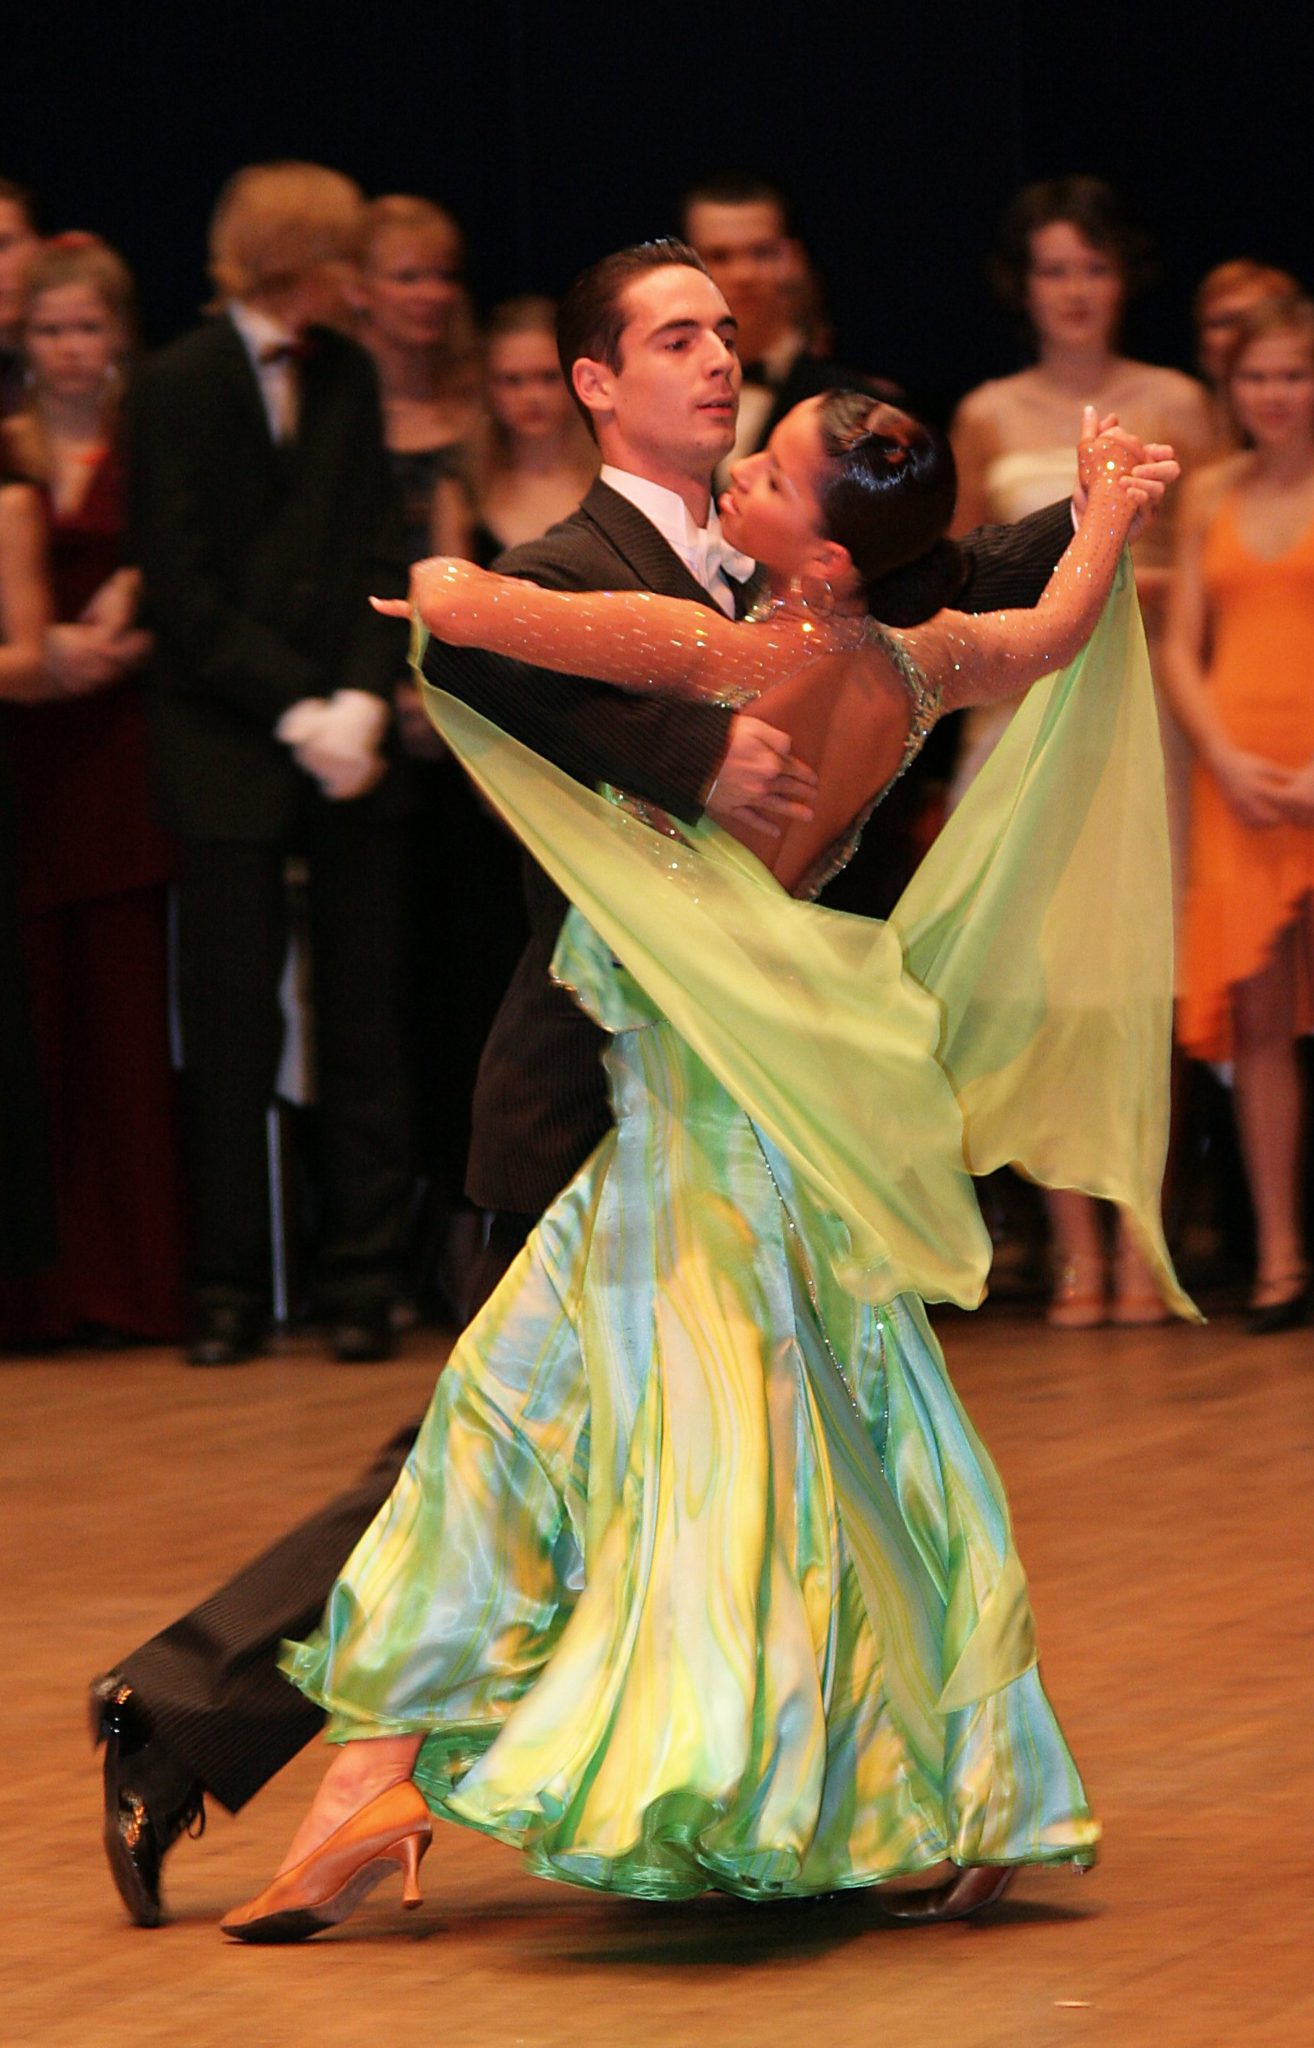 learning-the-viennese-waltz-dance-lessons-houston